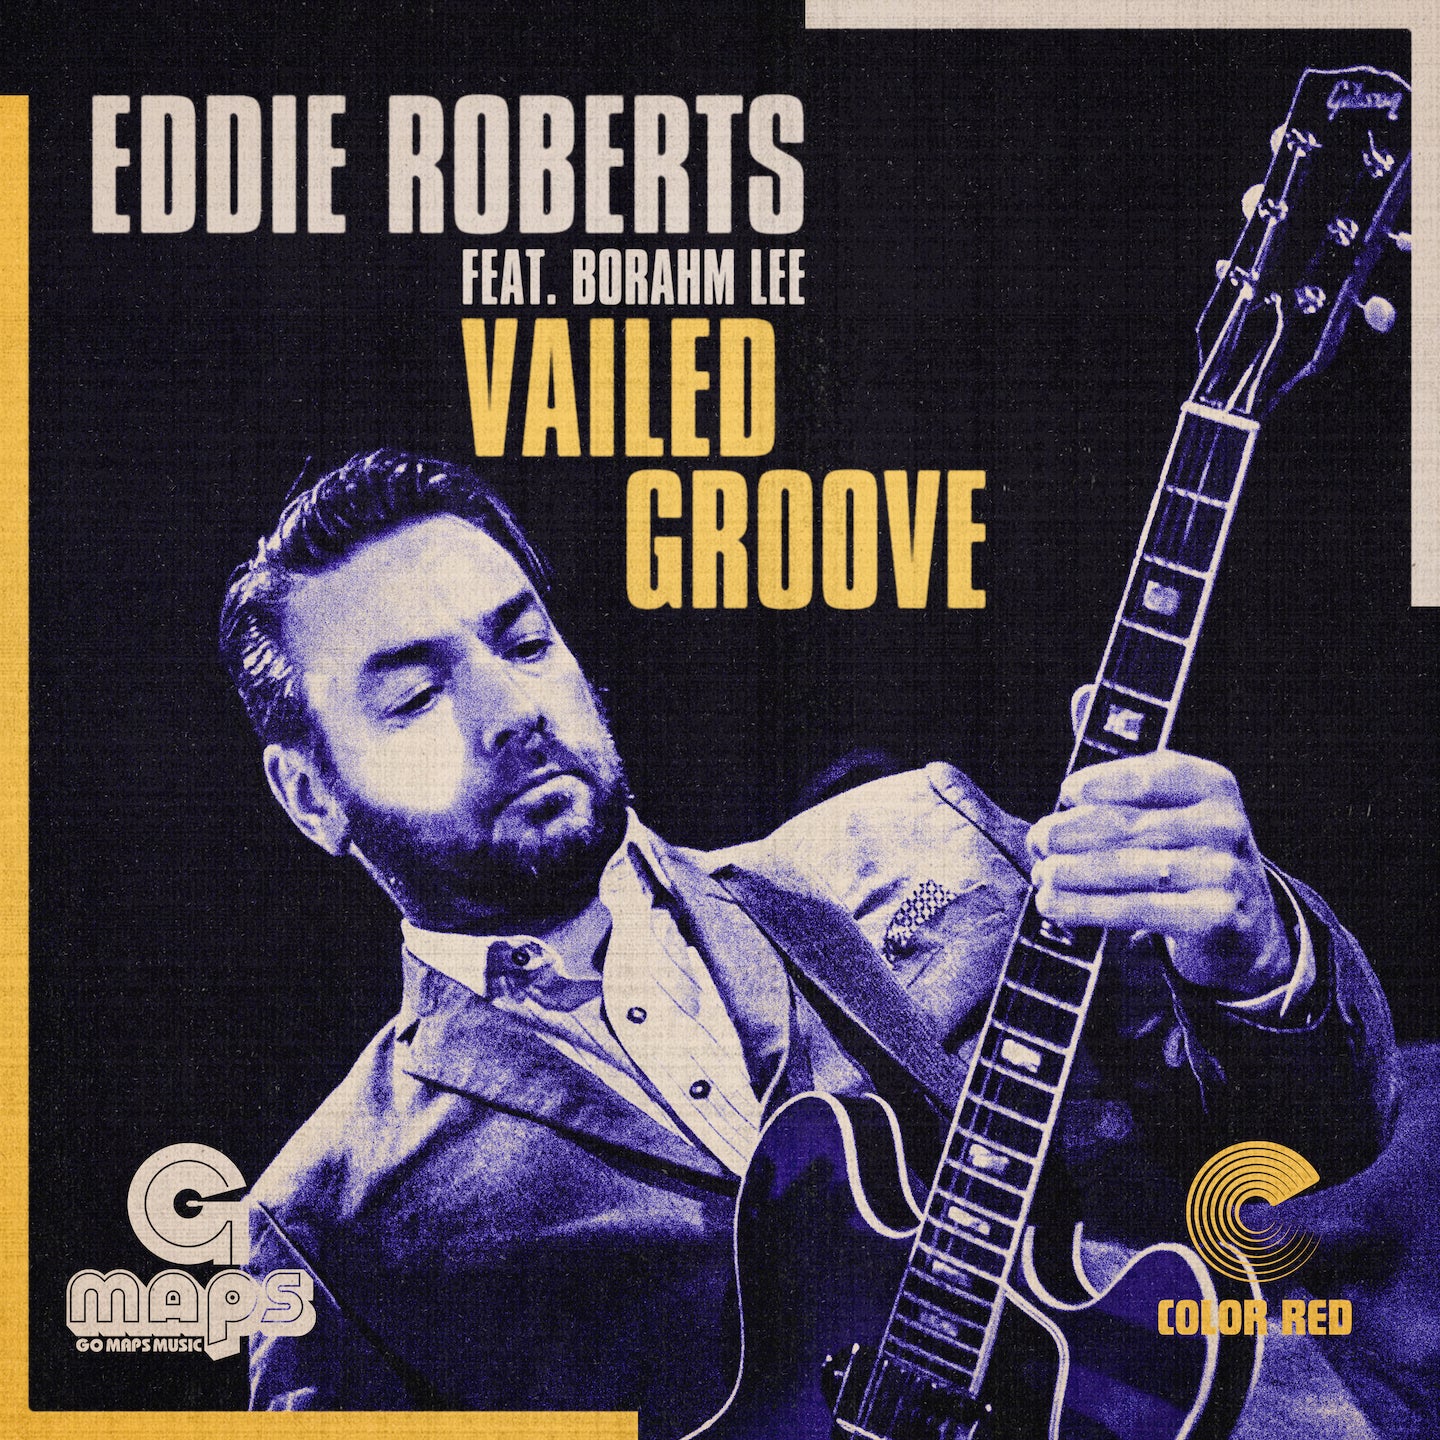 Vailed Groove